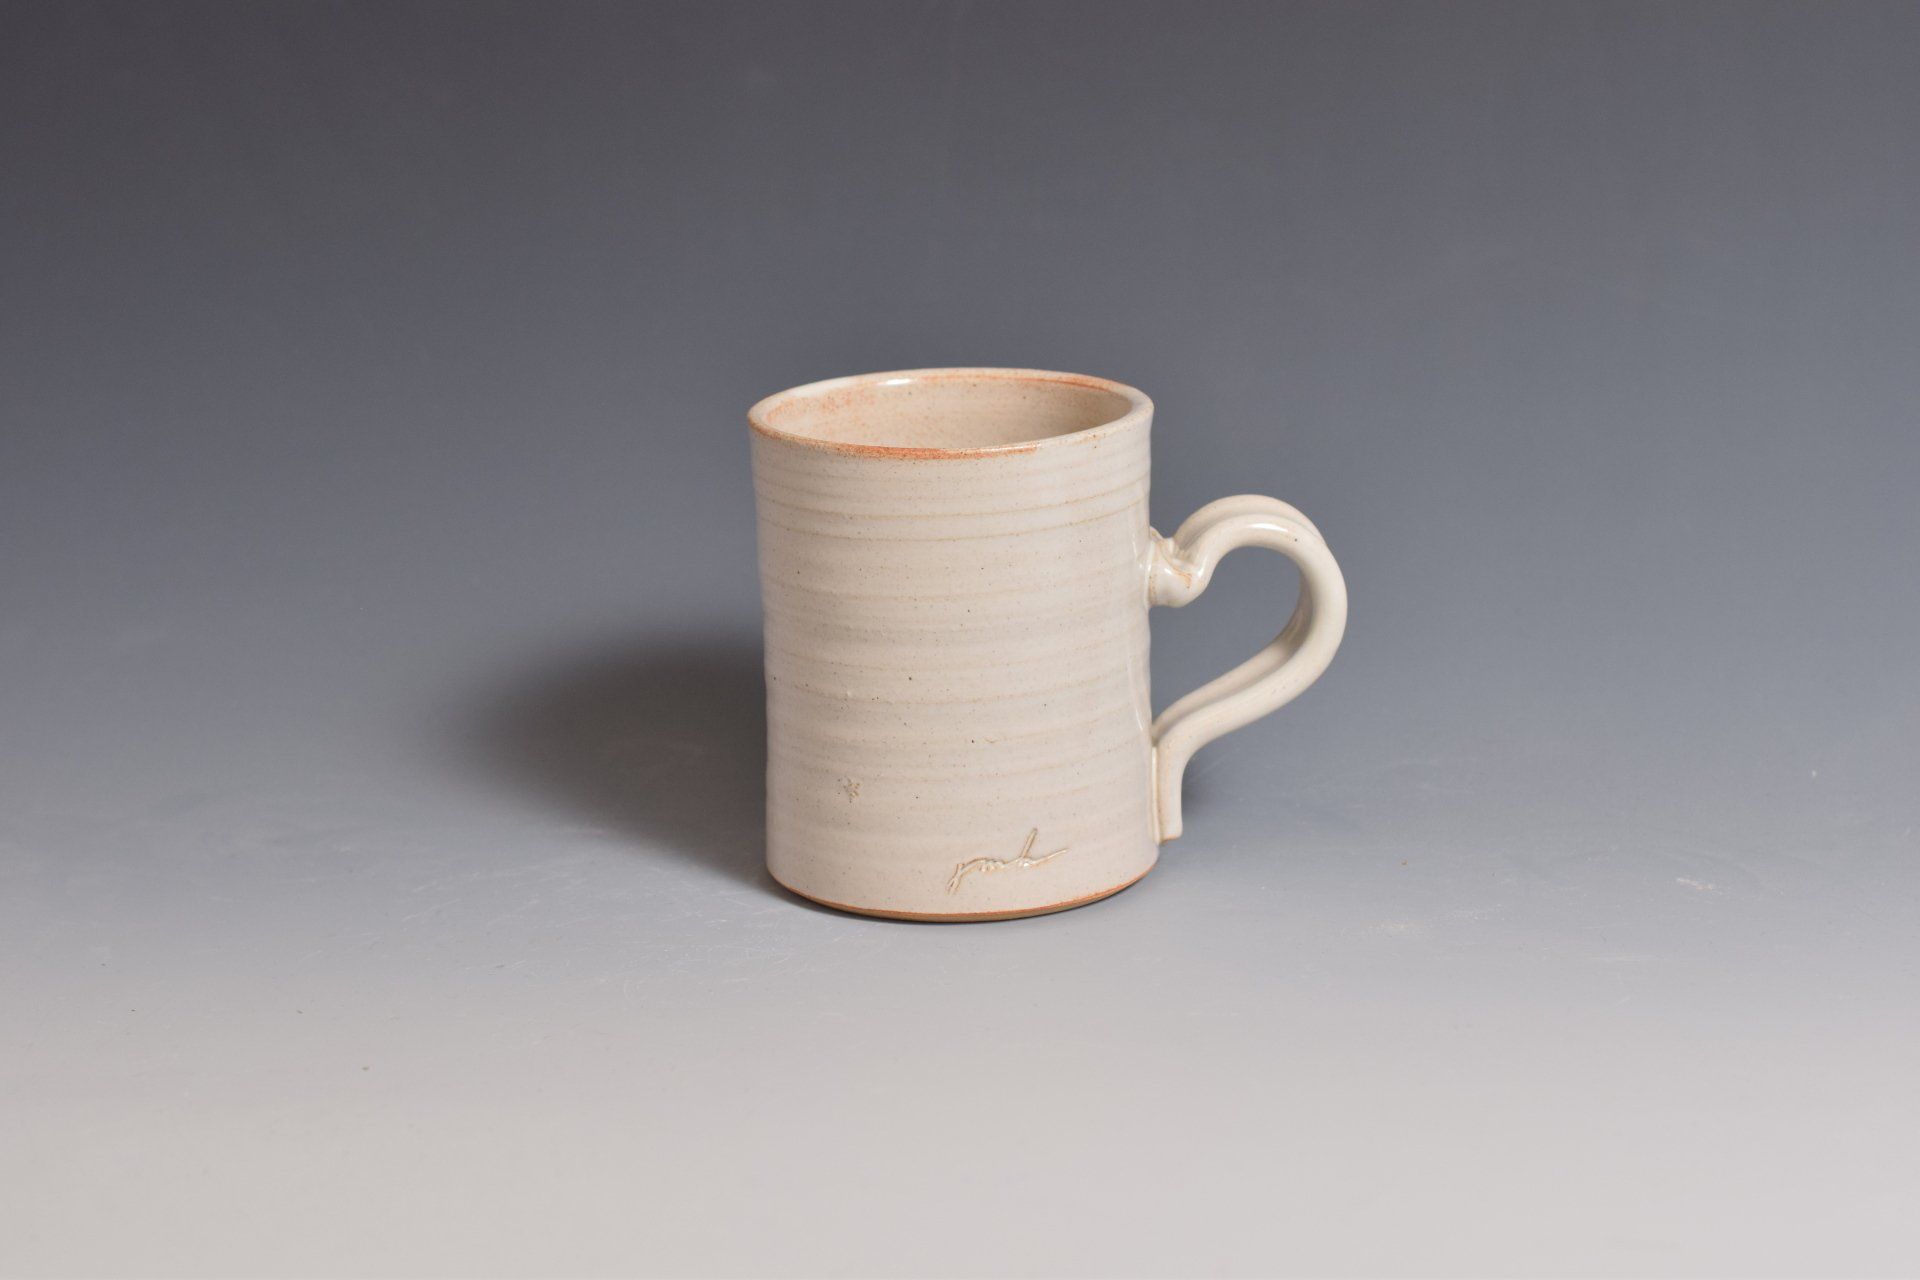 a white mug with a heart shaped handle is sitting on a table .